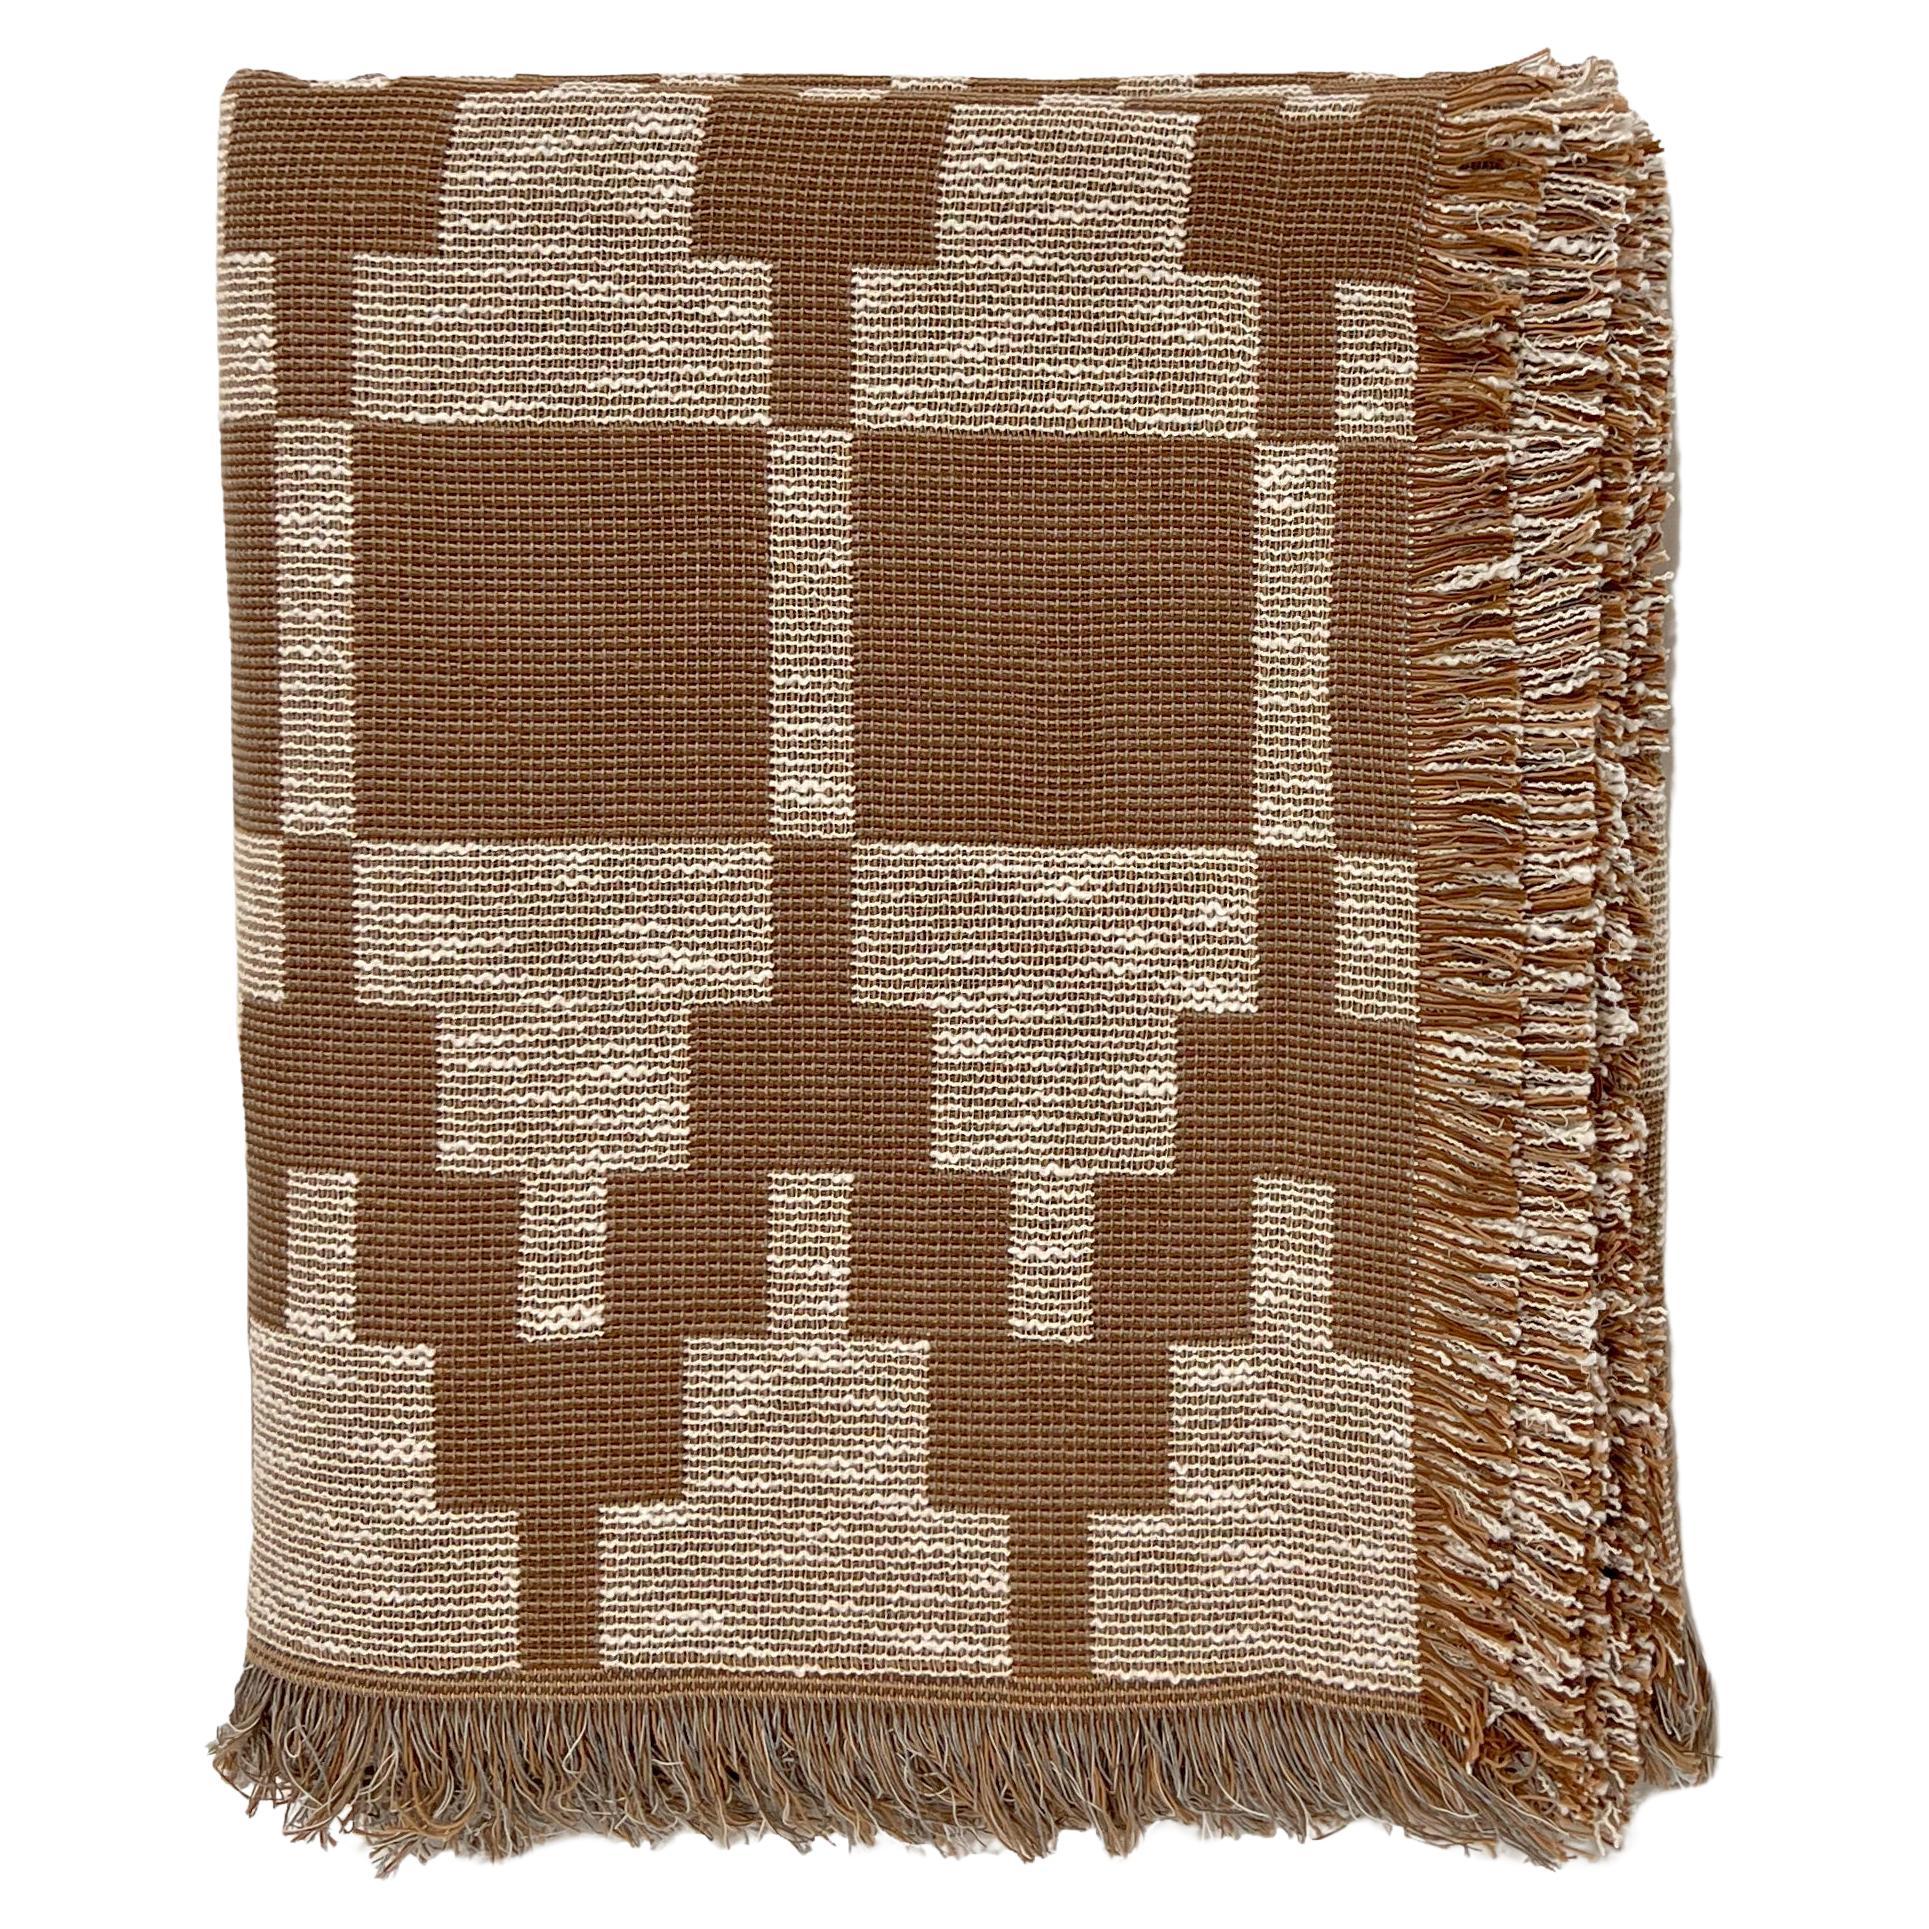 Patterned Woven Cotton Throw Blanket by Folk Textiles (Willa / Mud)